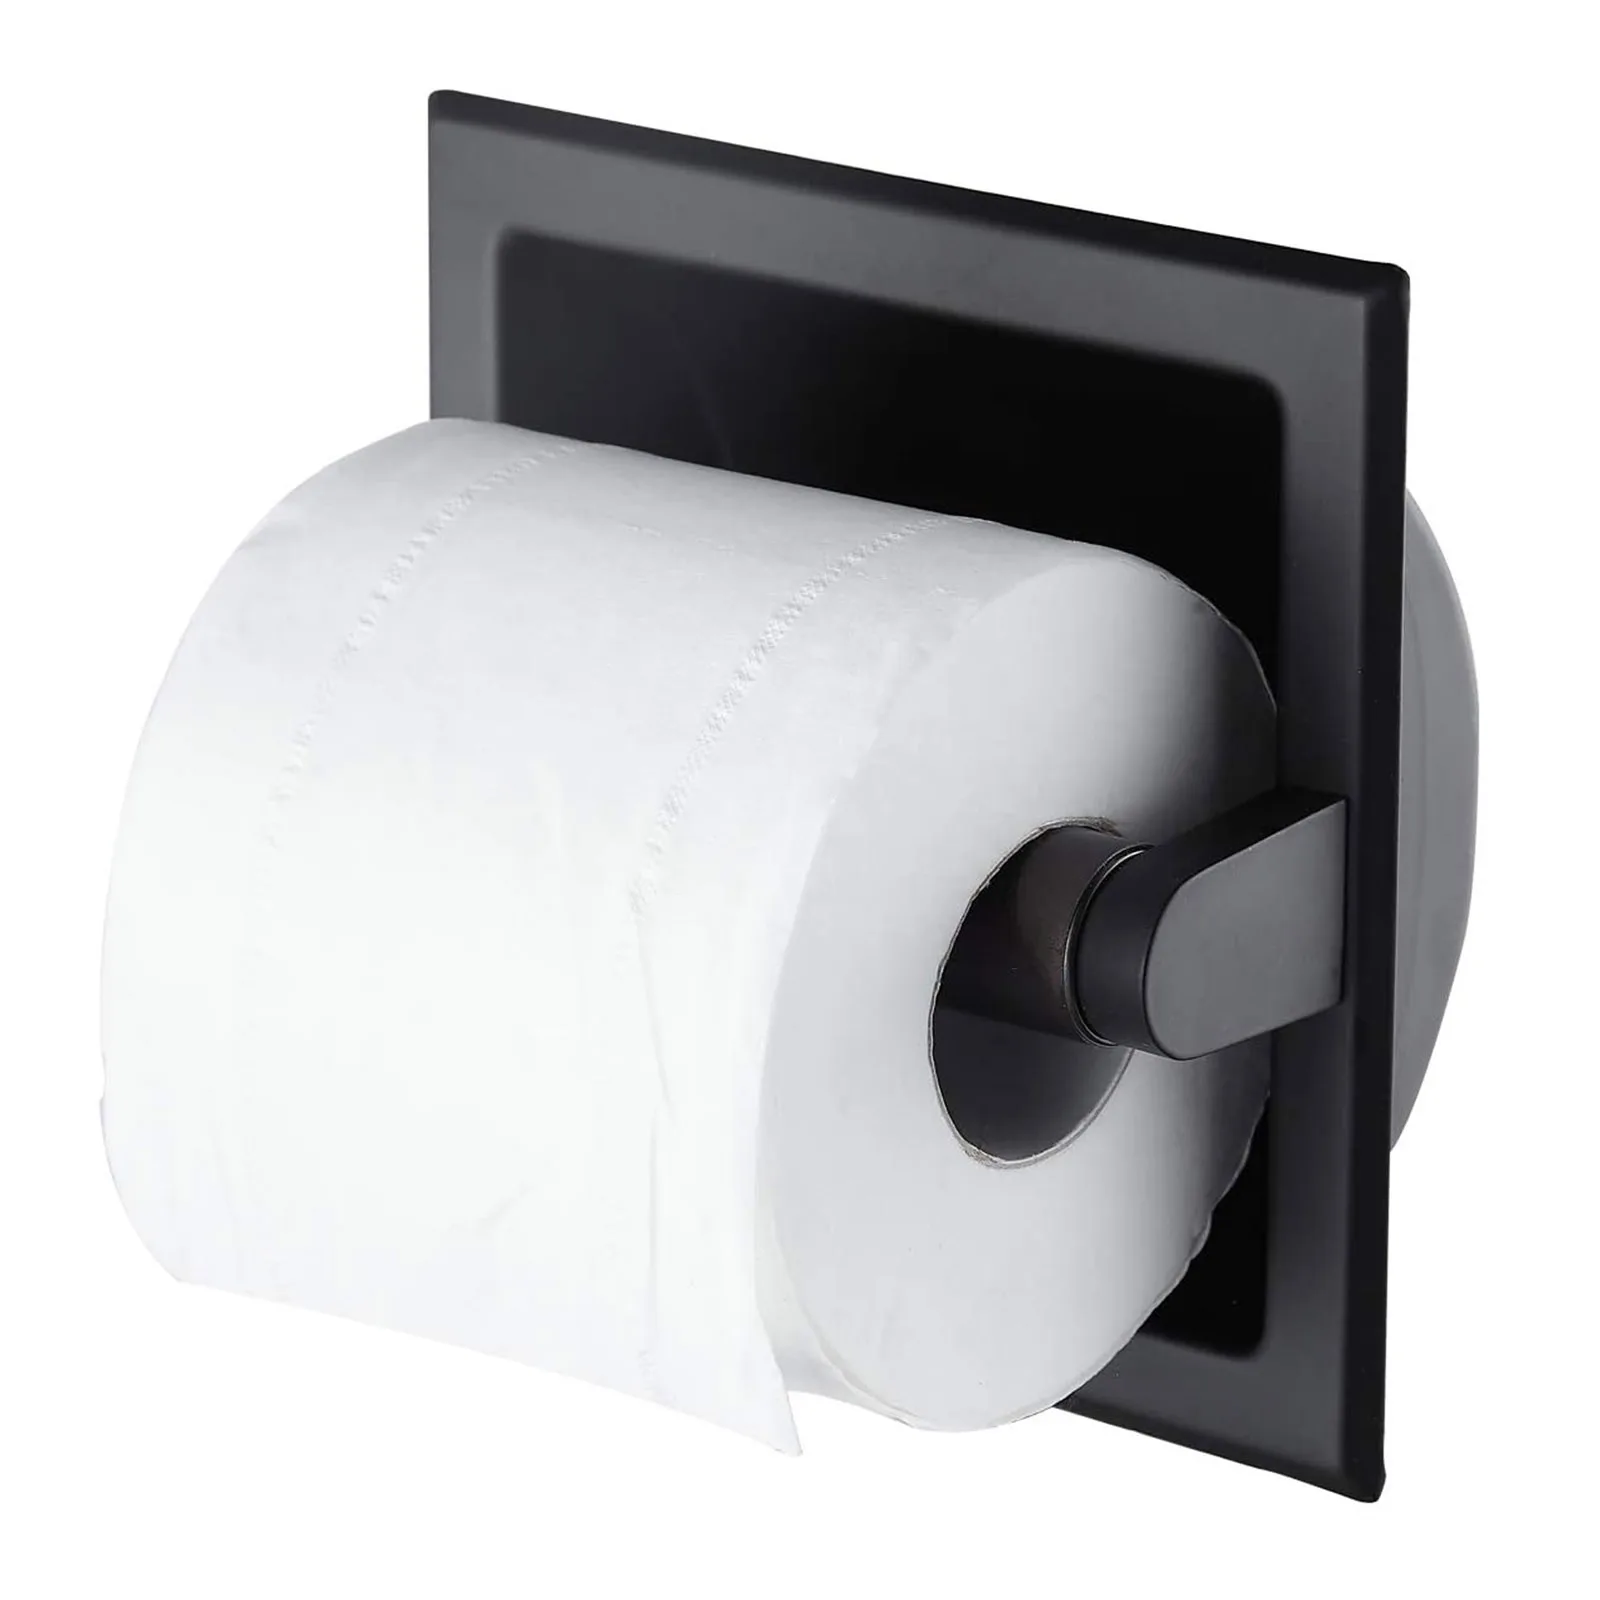 Black Recessed Toilet/Tissue Paper Holder Wall Mounted Rack Storage All Metal 